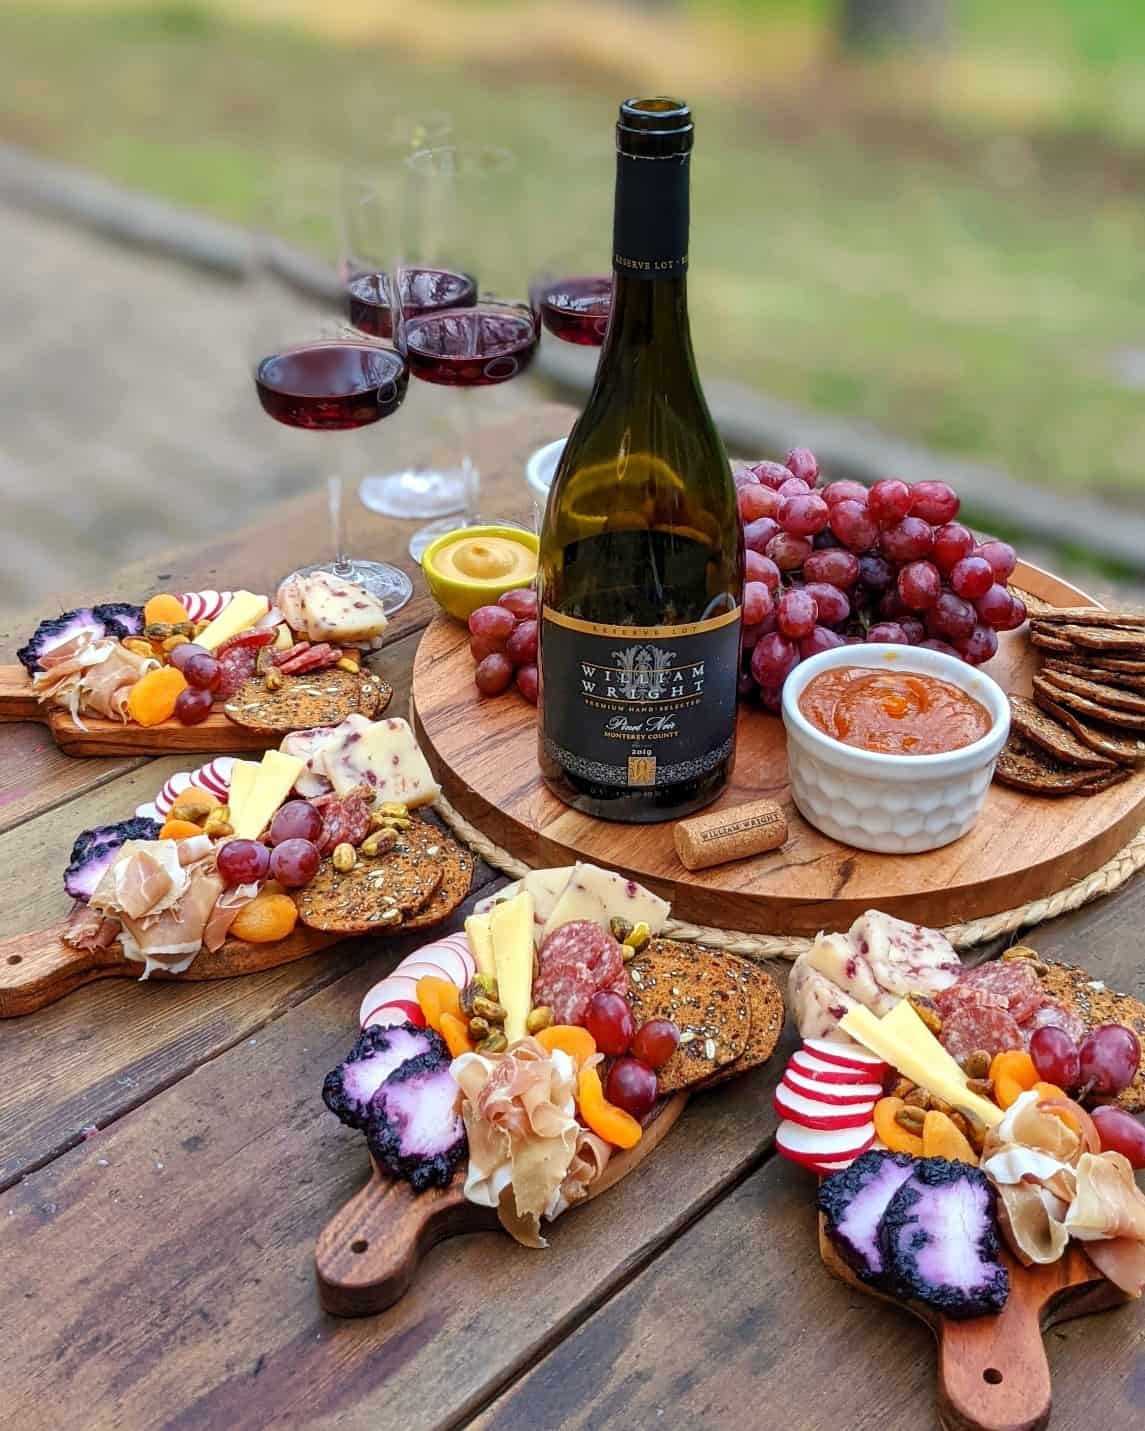 The Best Wine with a Charcuterie Board (According to an Expert